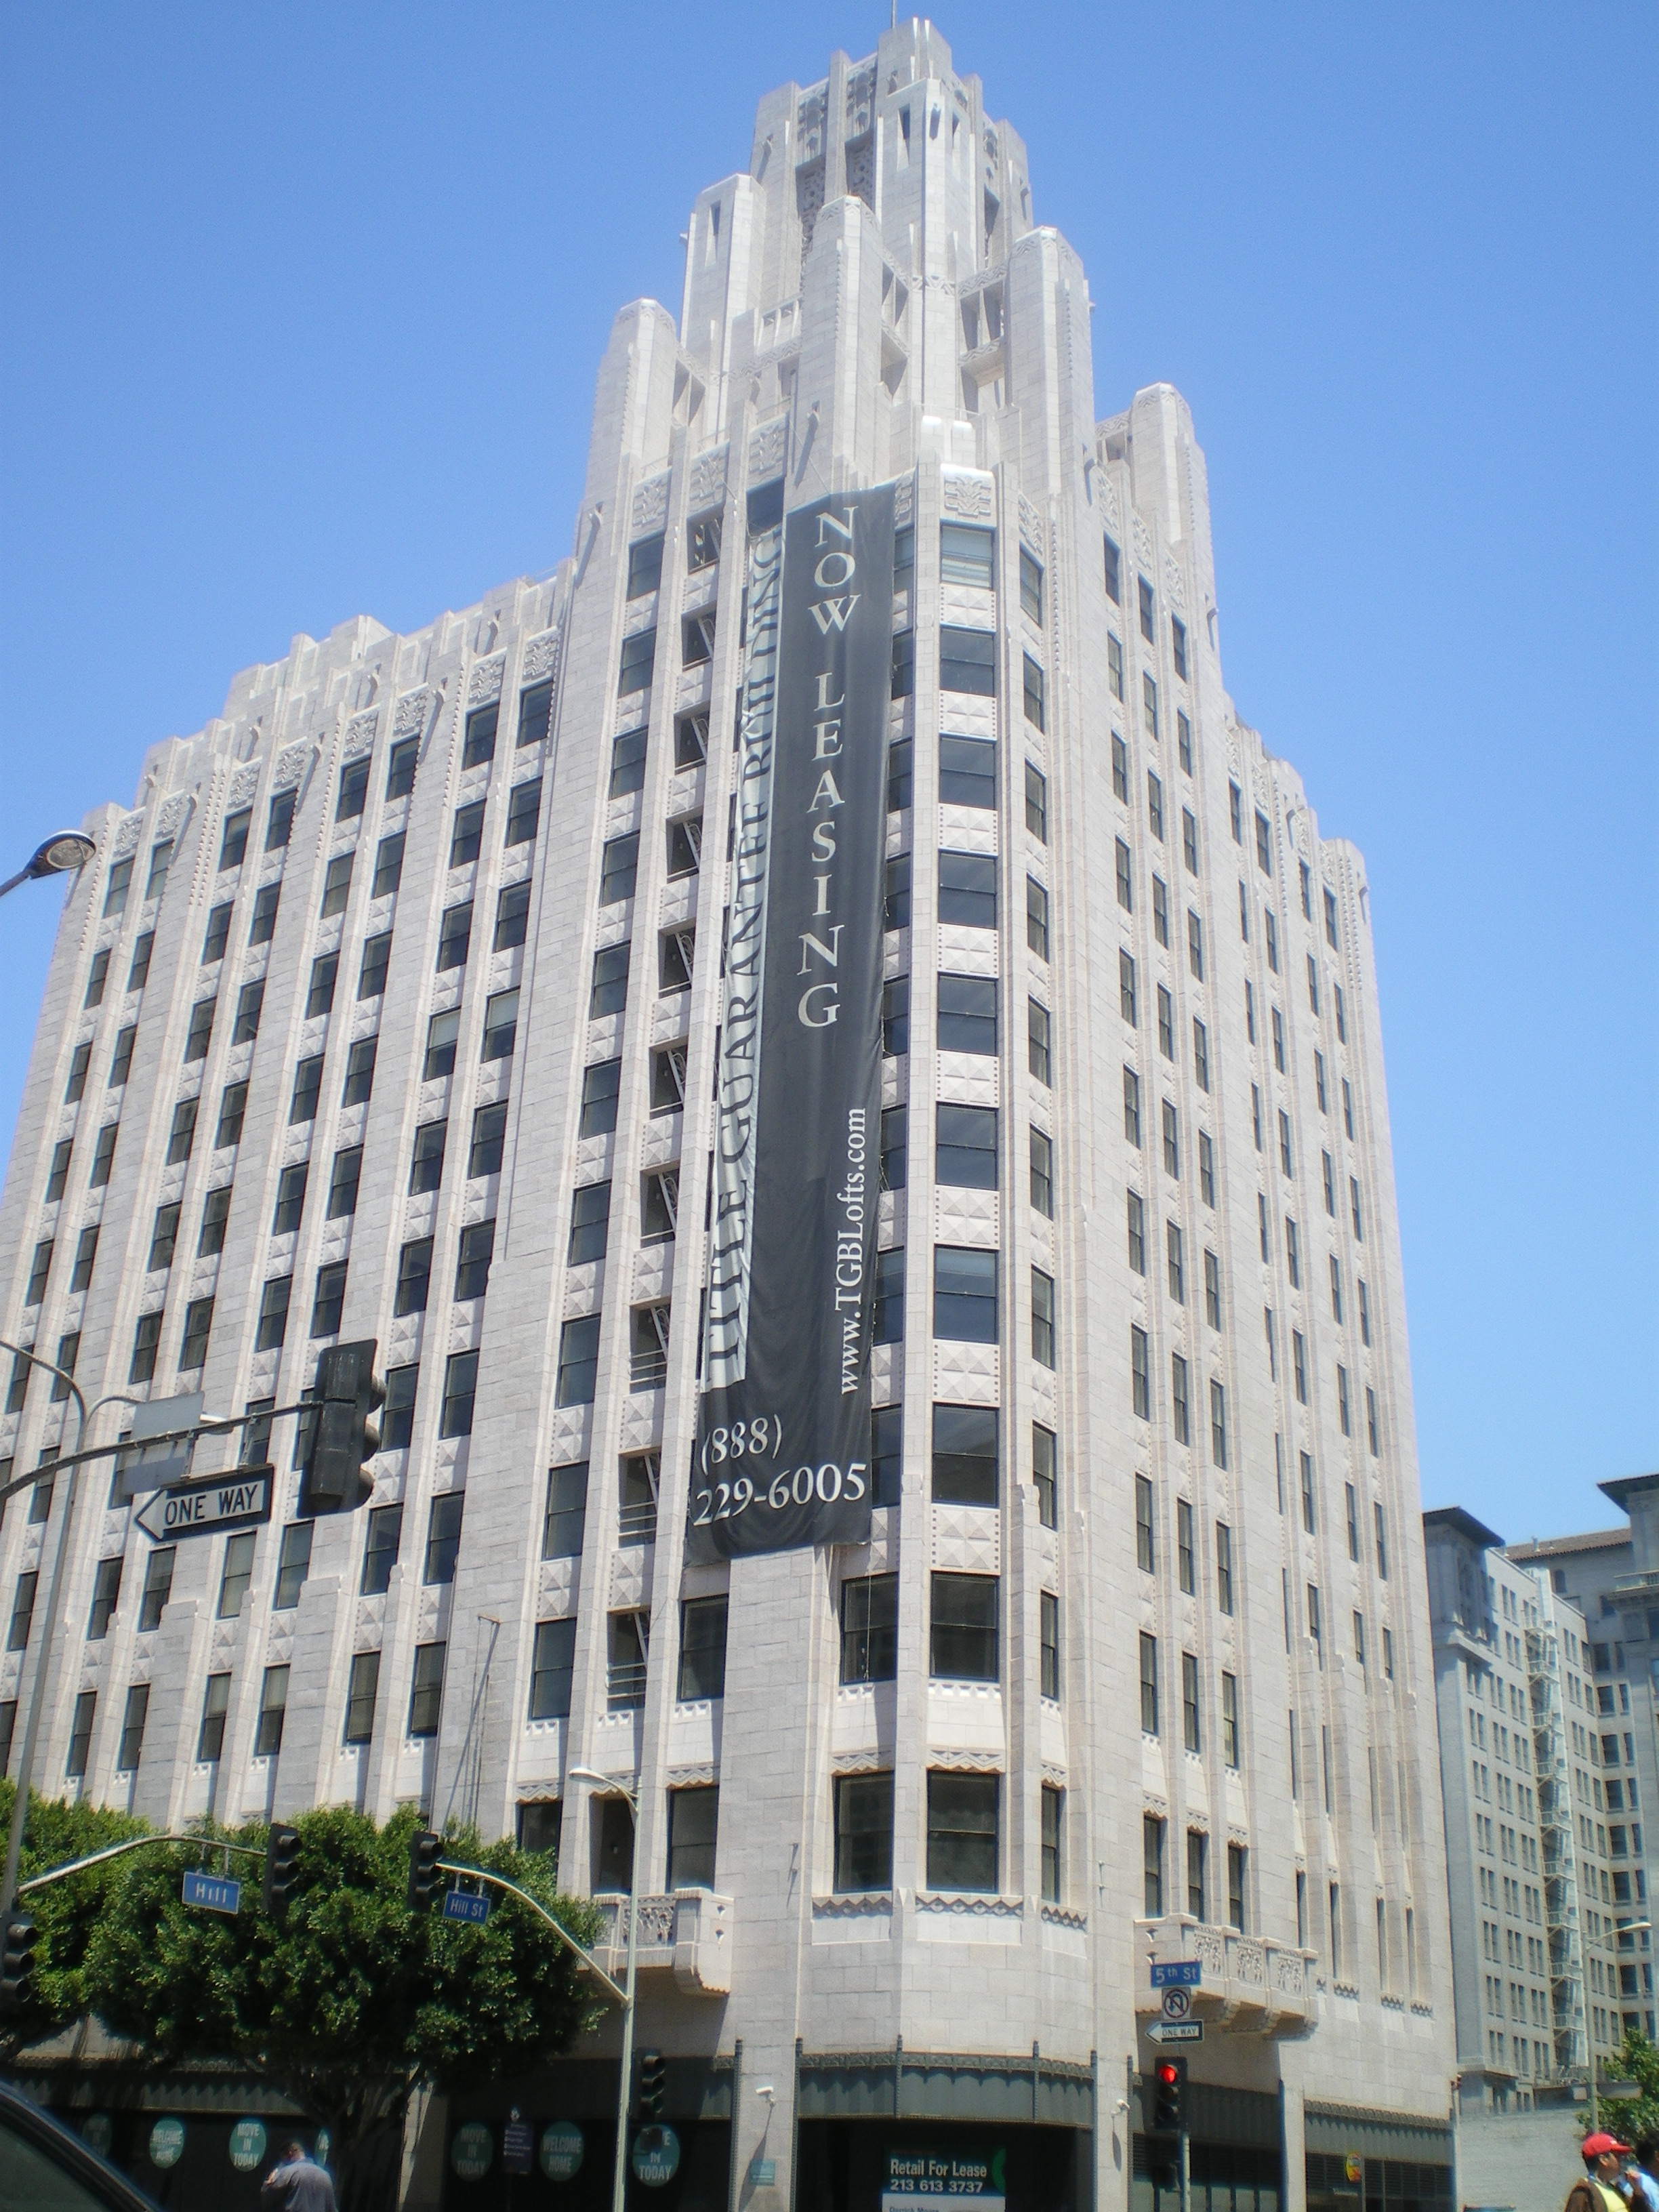 File:Title Guarantee and Trust Company Building, Los Angeles.JPG